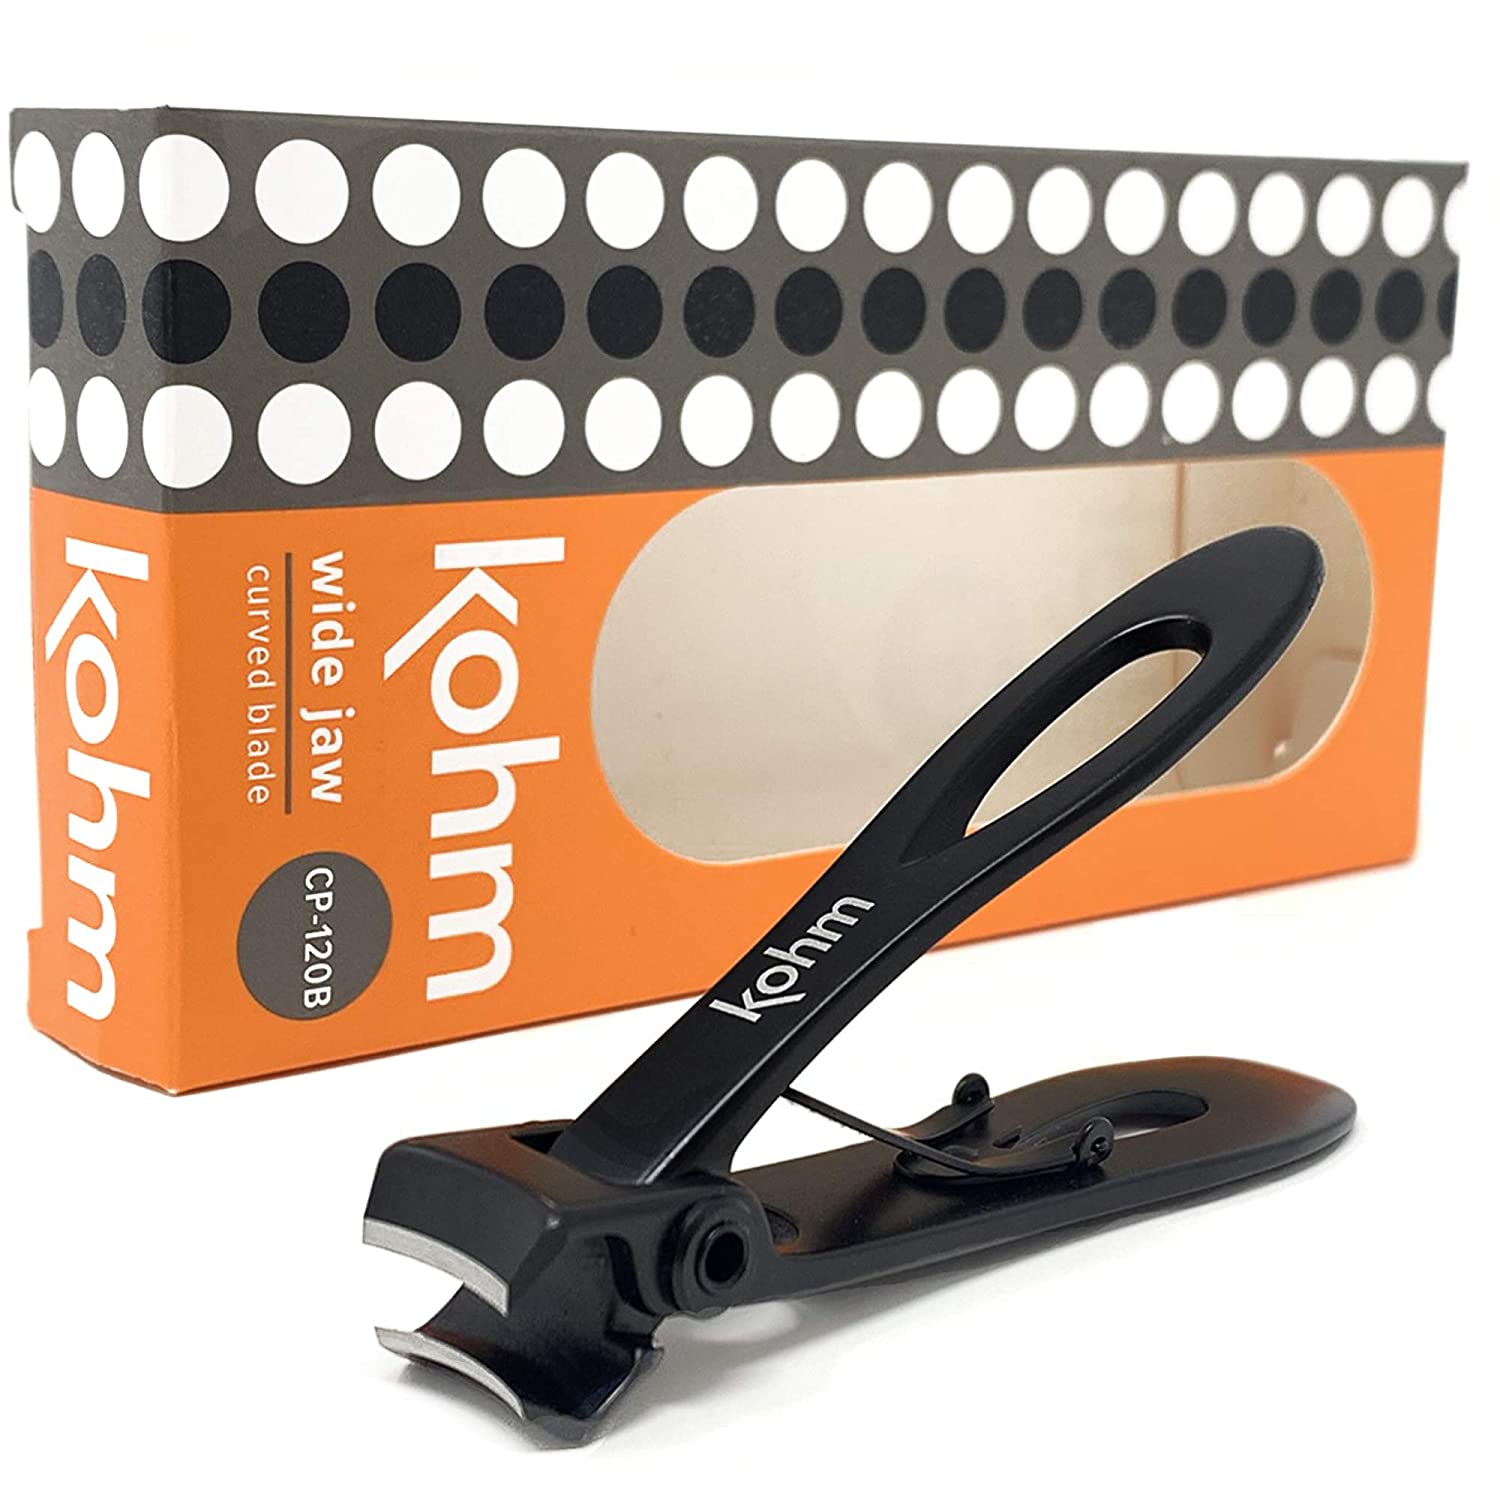 Kohm Nail clippers for Thick Nails - Heavy Duty, Wide Mouth